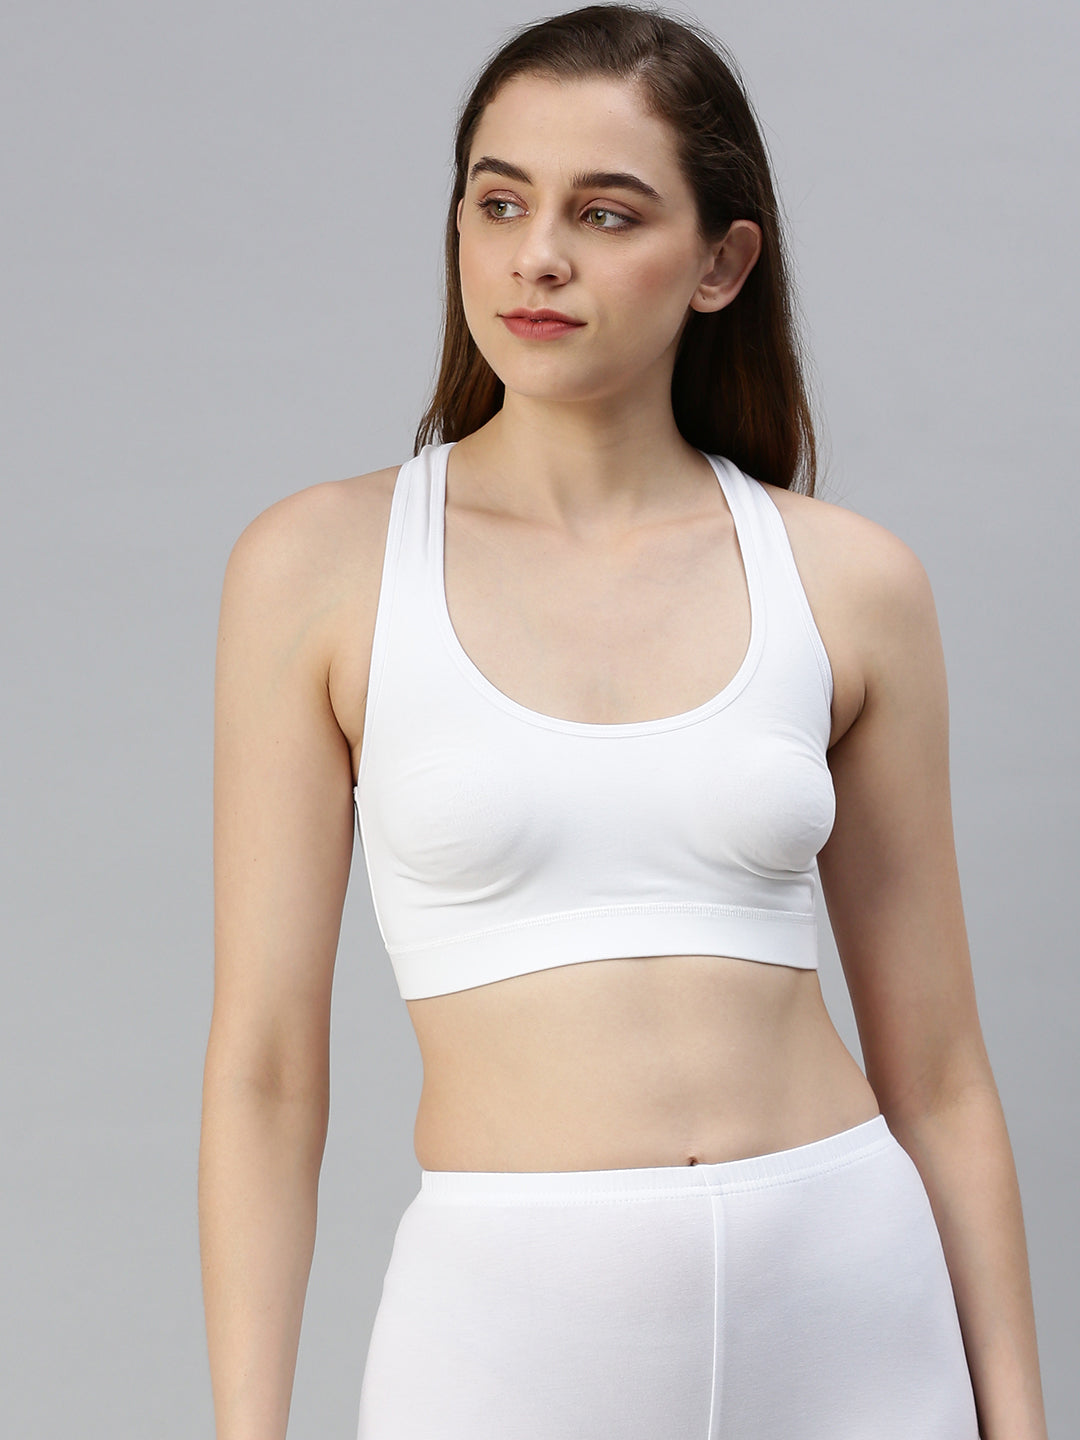 Get the Perfect Look with Prisma Racer Fit-White